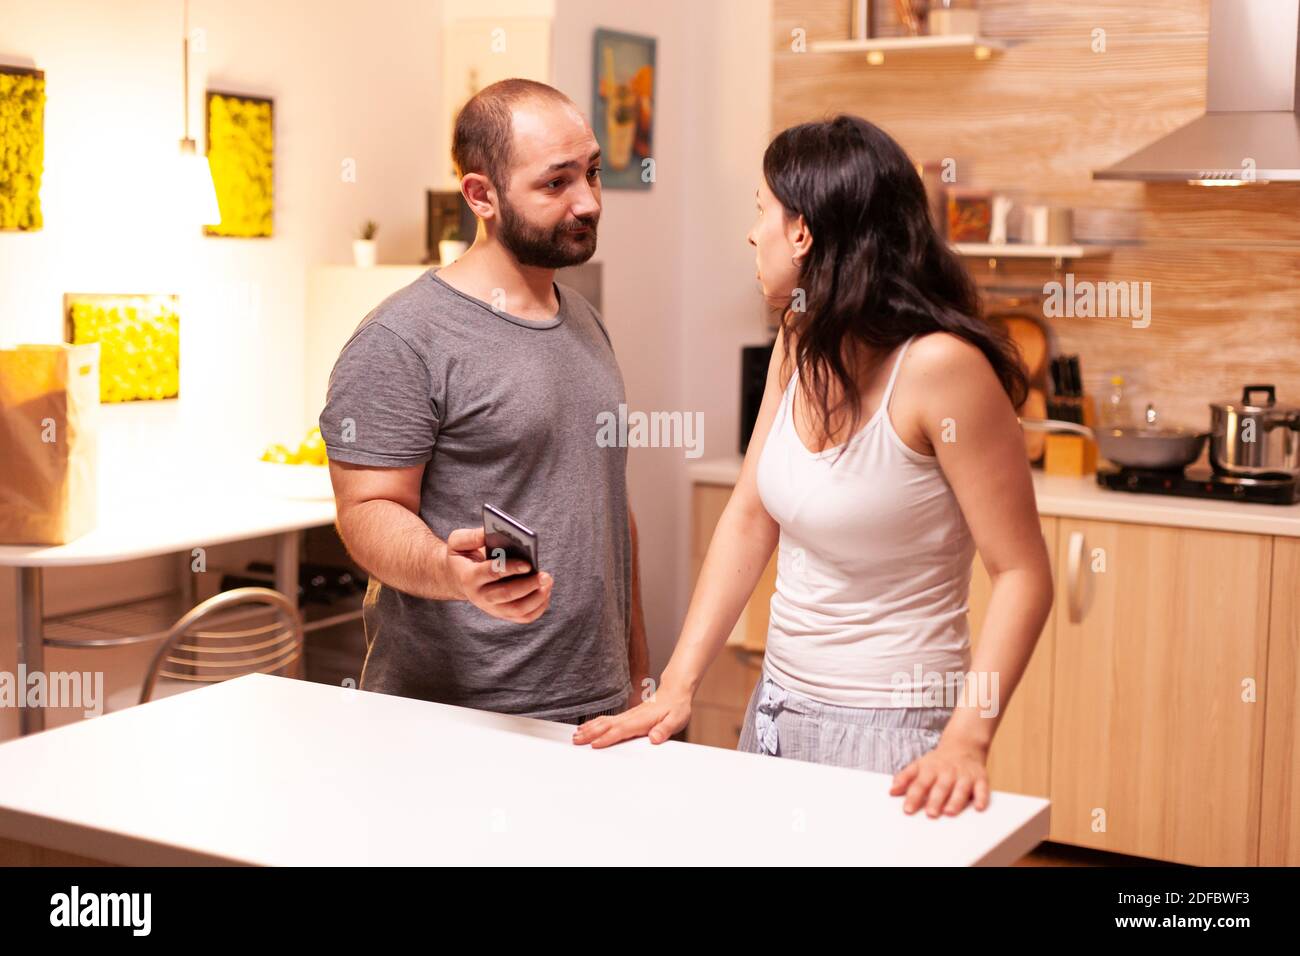 Jealous husband asking for explanations after checking wife's phone. Cheated angry frustrated irritated man accusing woman of infidelity arguing her with messages on smartphone screaming desperate Stock Photo